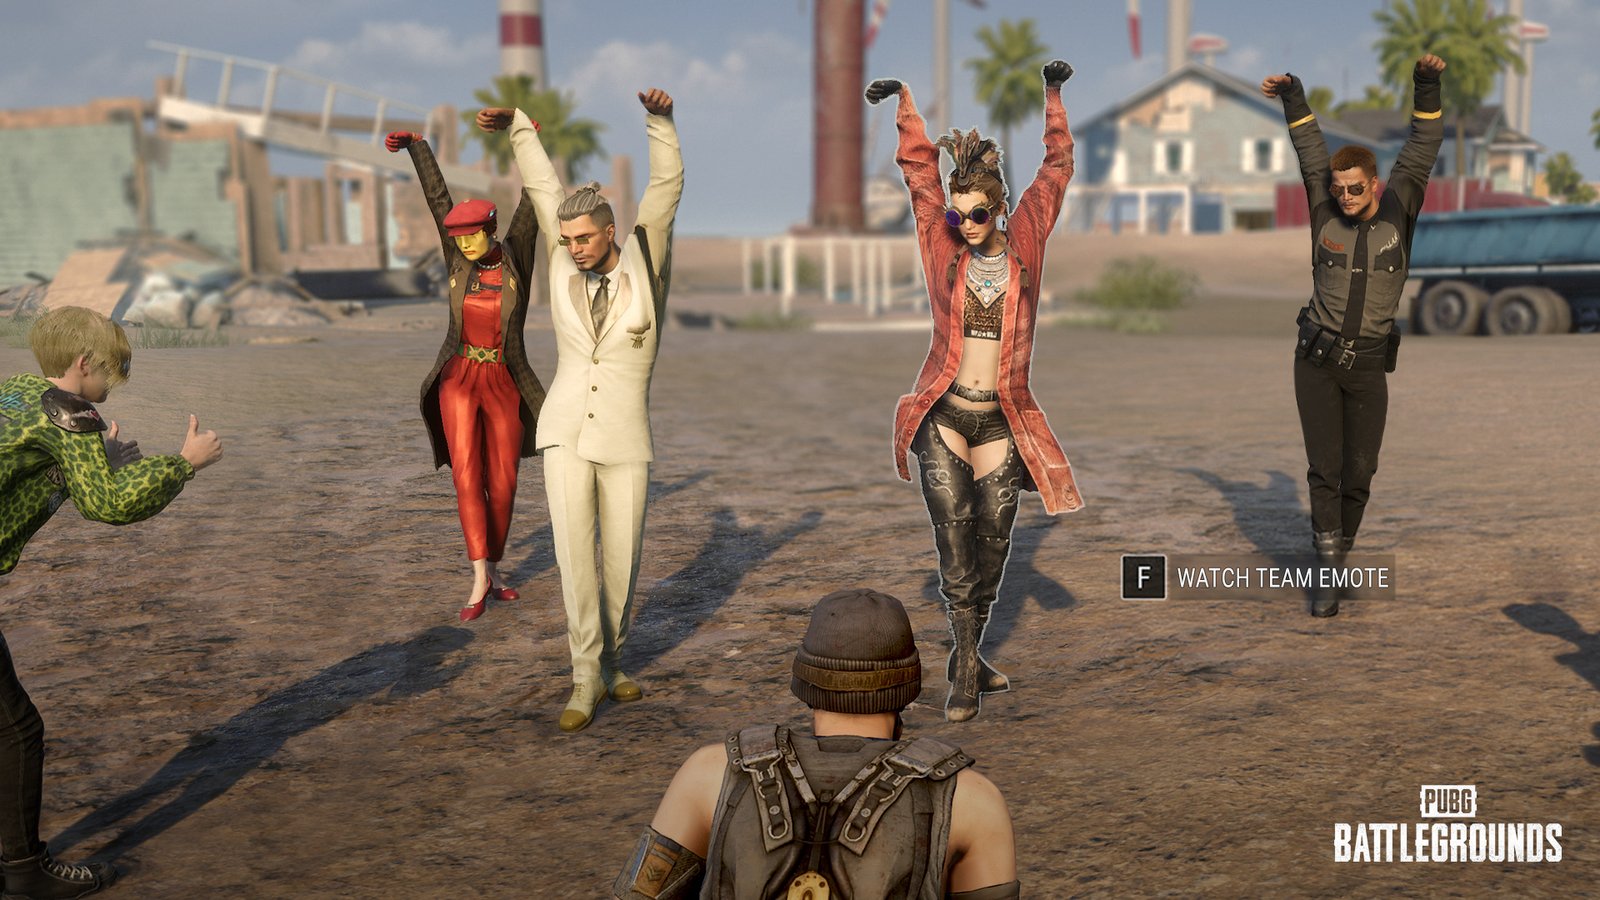 Playerunknown's Battlegrounds characters dancing in fancy outfits